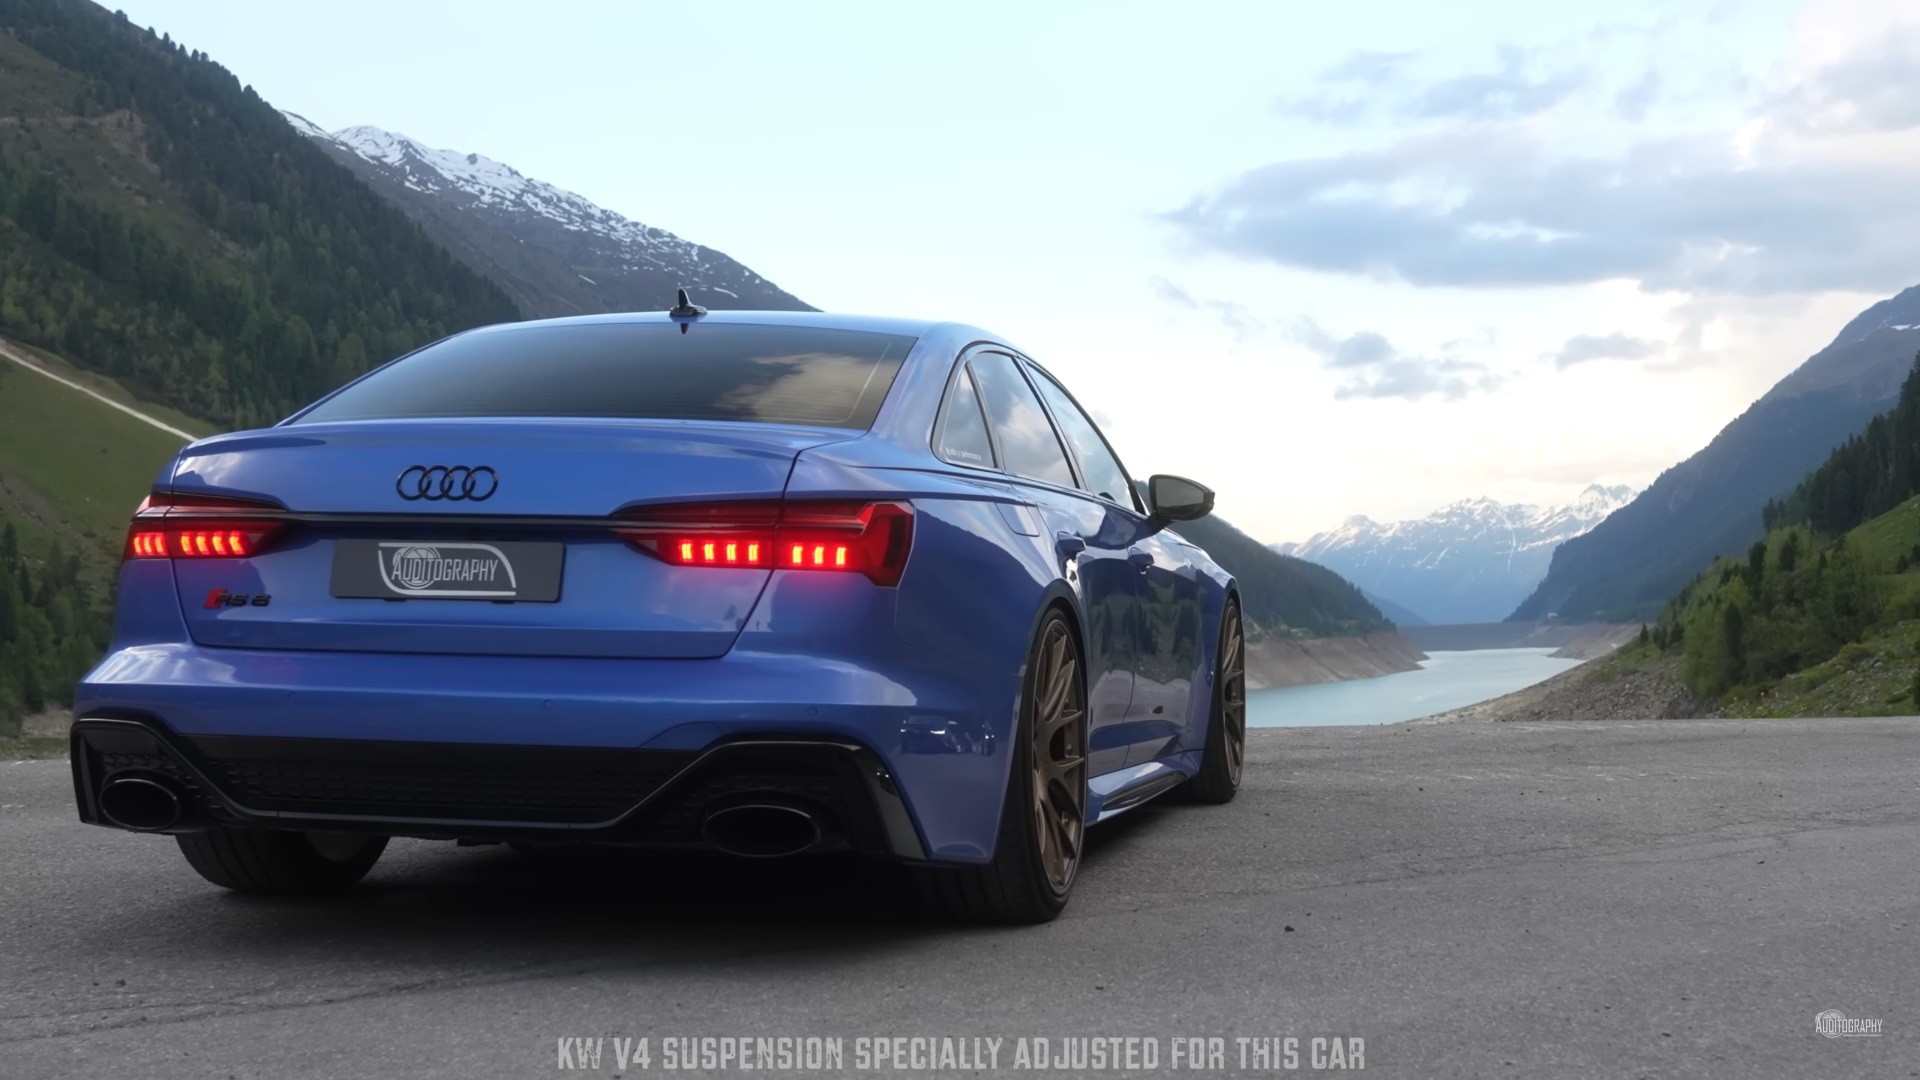 Video: The Audi RS 6 Sedan Is Real, and It's Quicker Than a